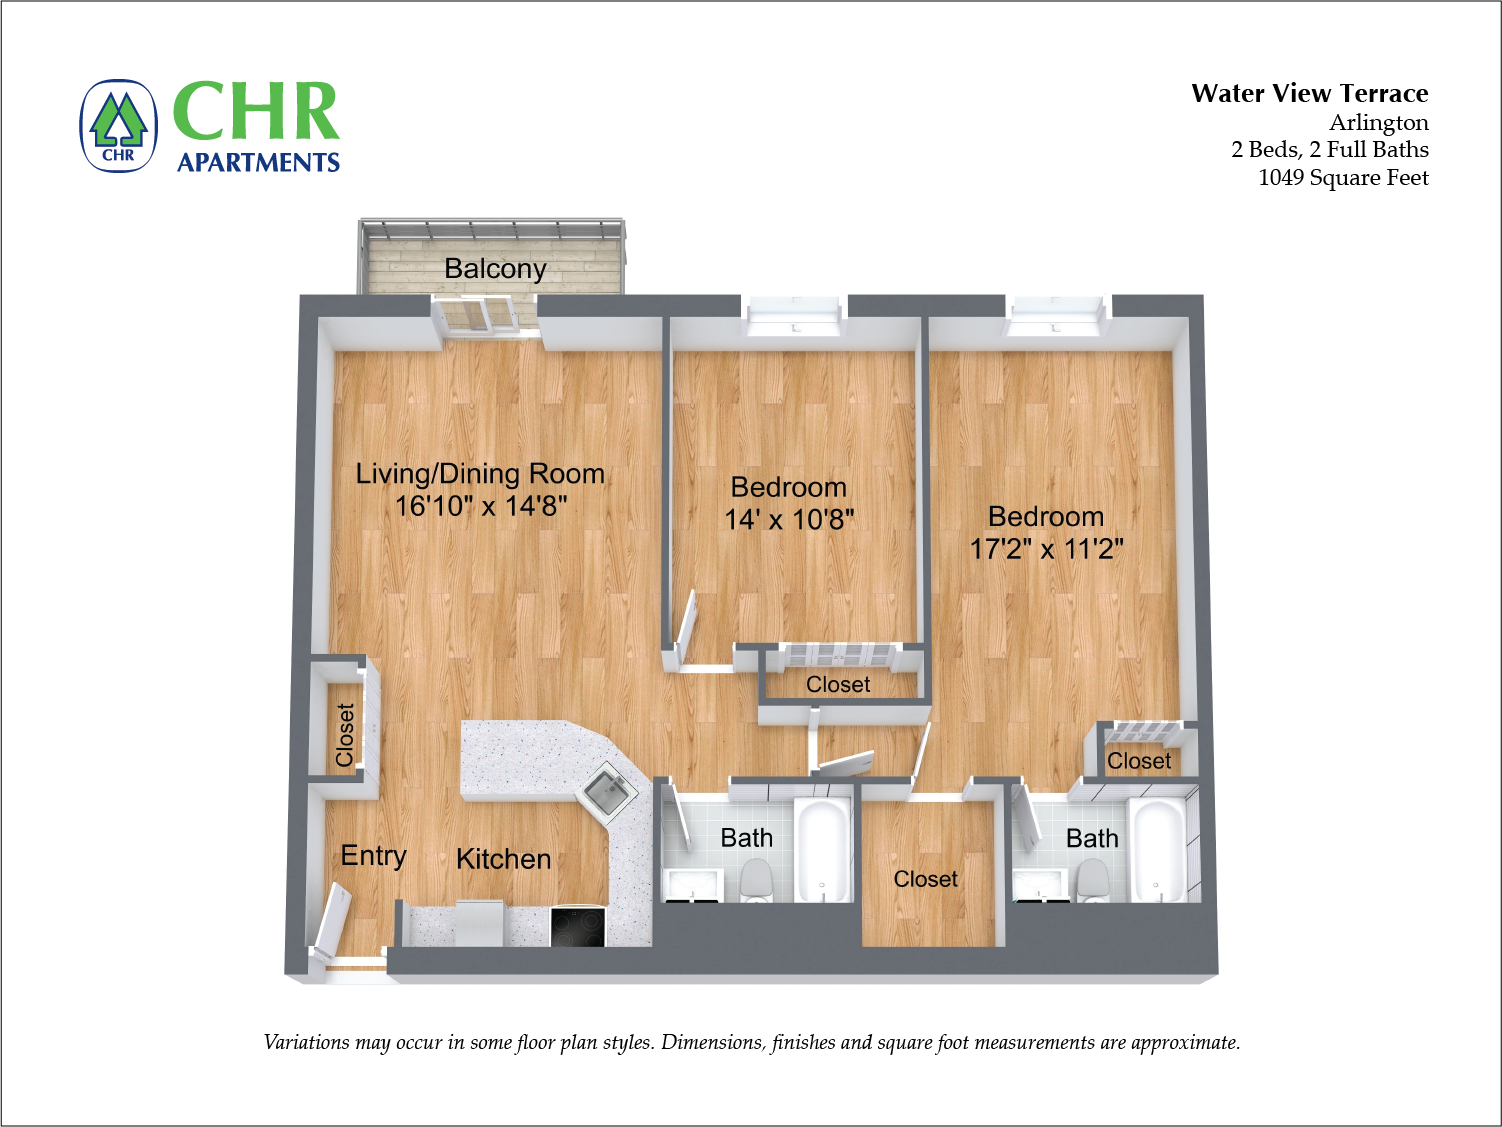 Click to view Floor plan 2 Bed/2 Bath with Walk-in Closet image 1